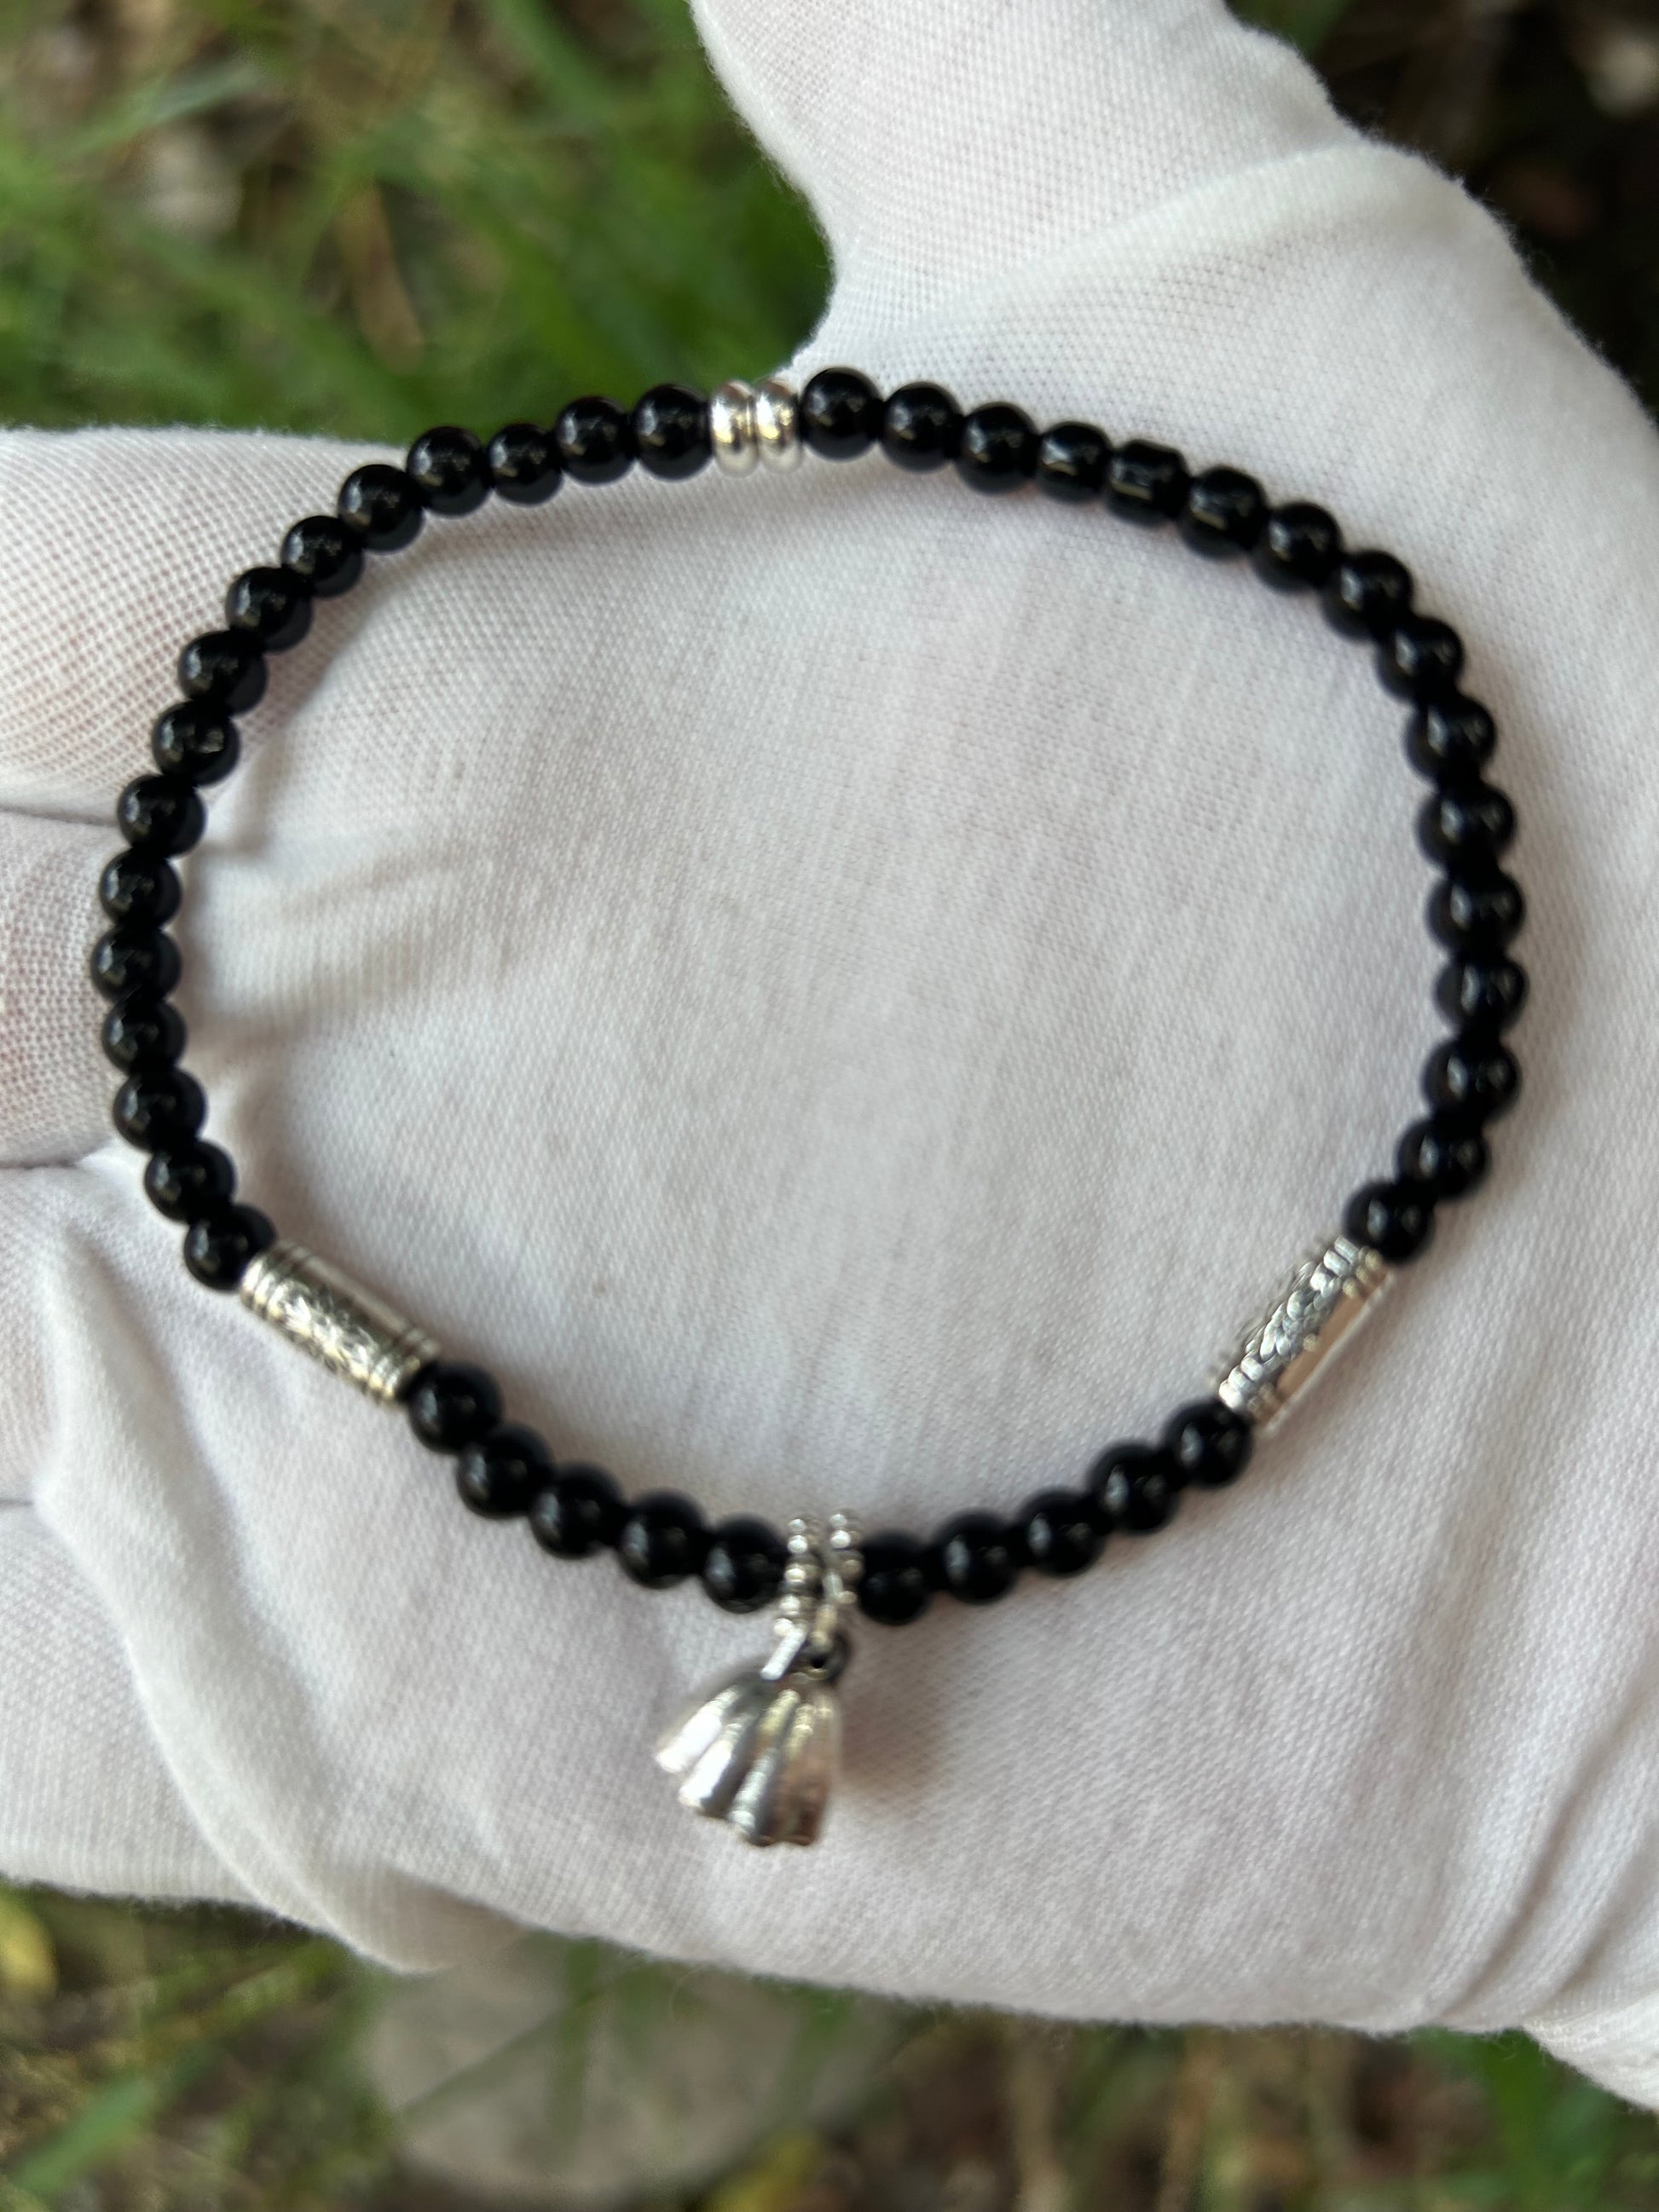 black onyx round bead bracelet with ornate silver detail and silver charm